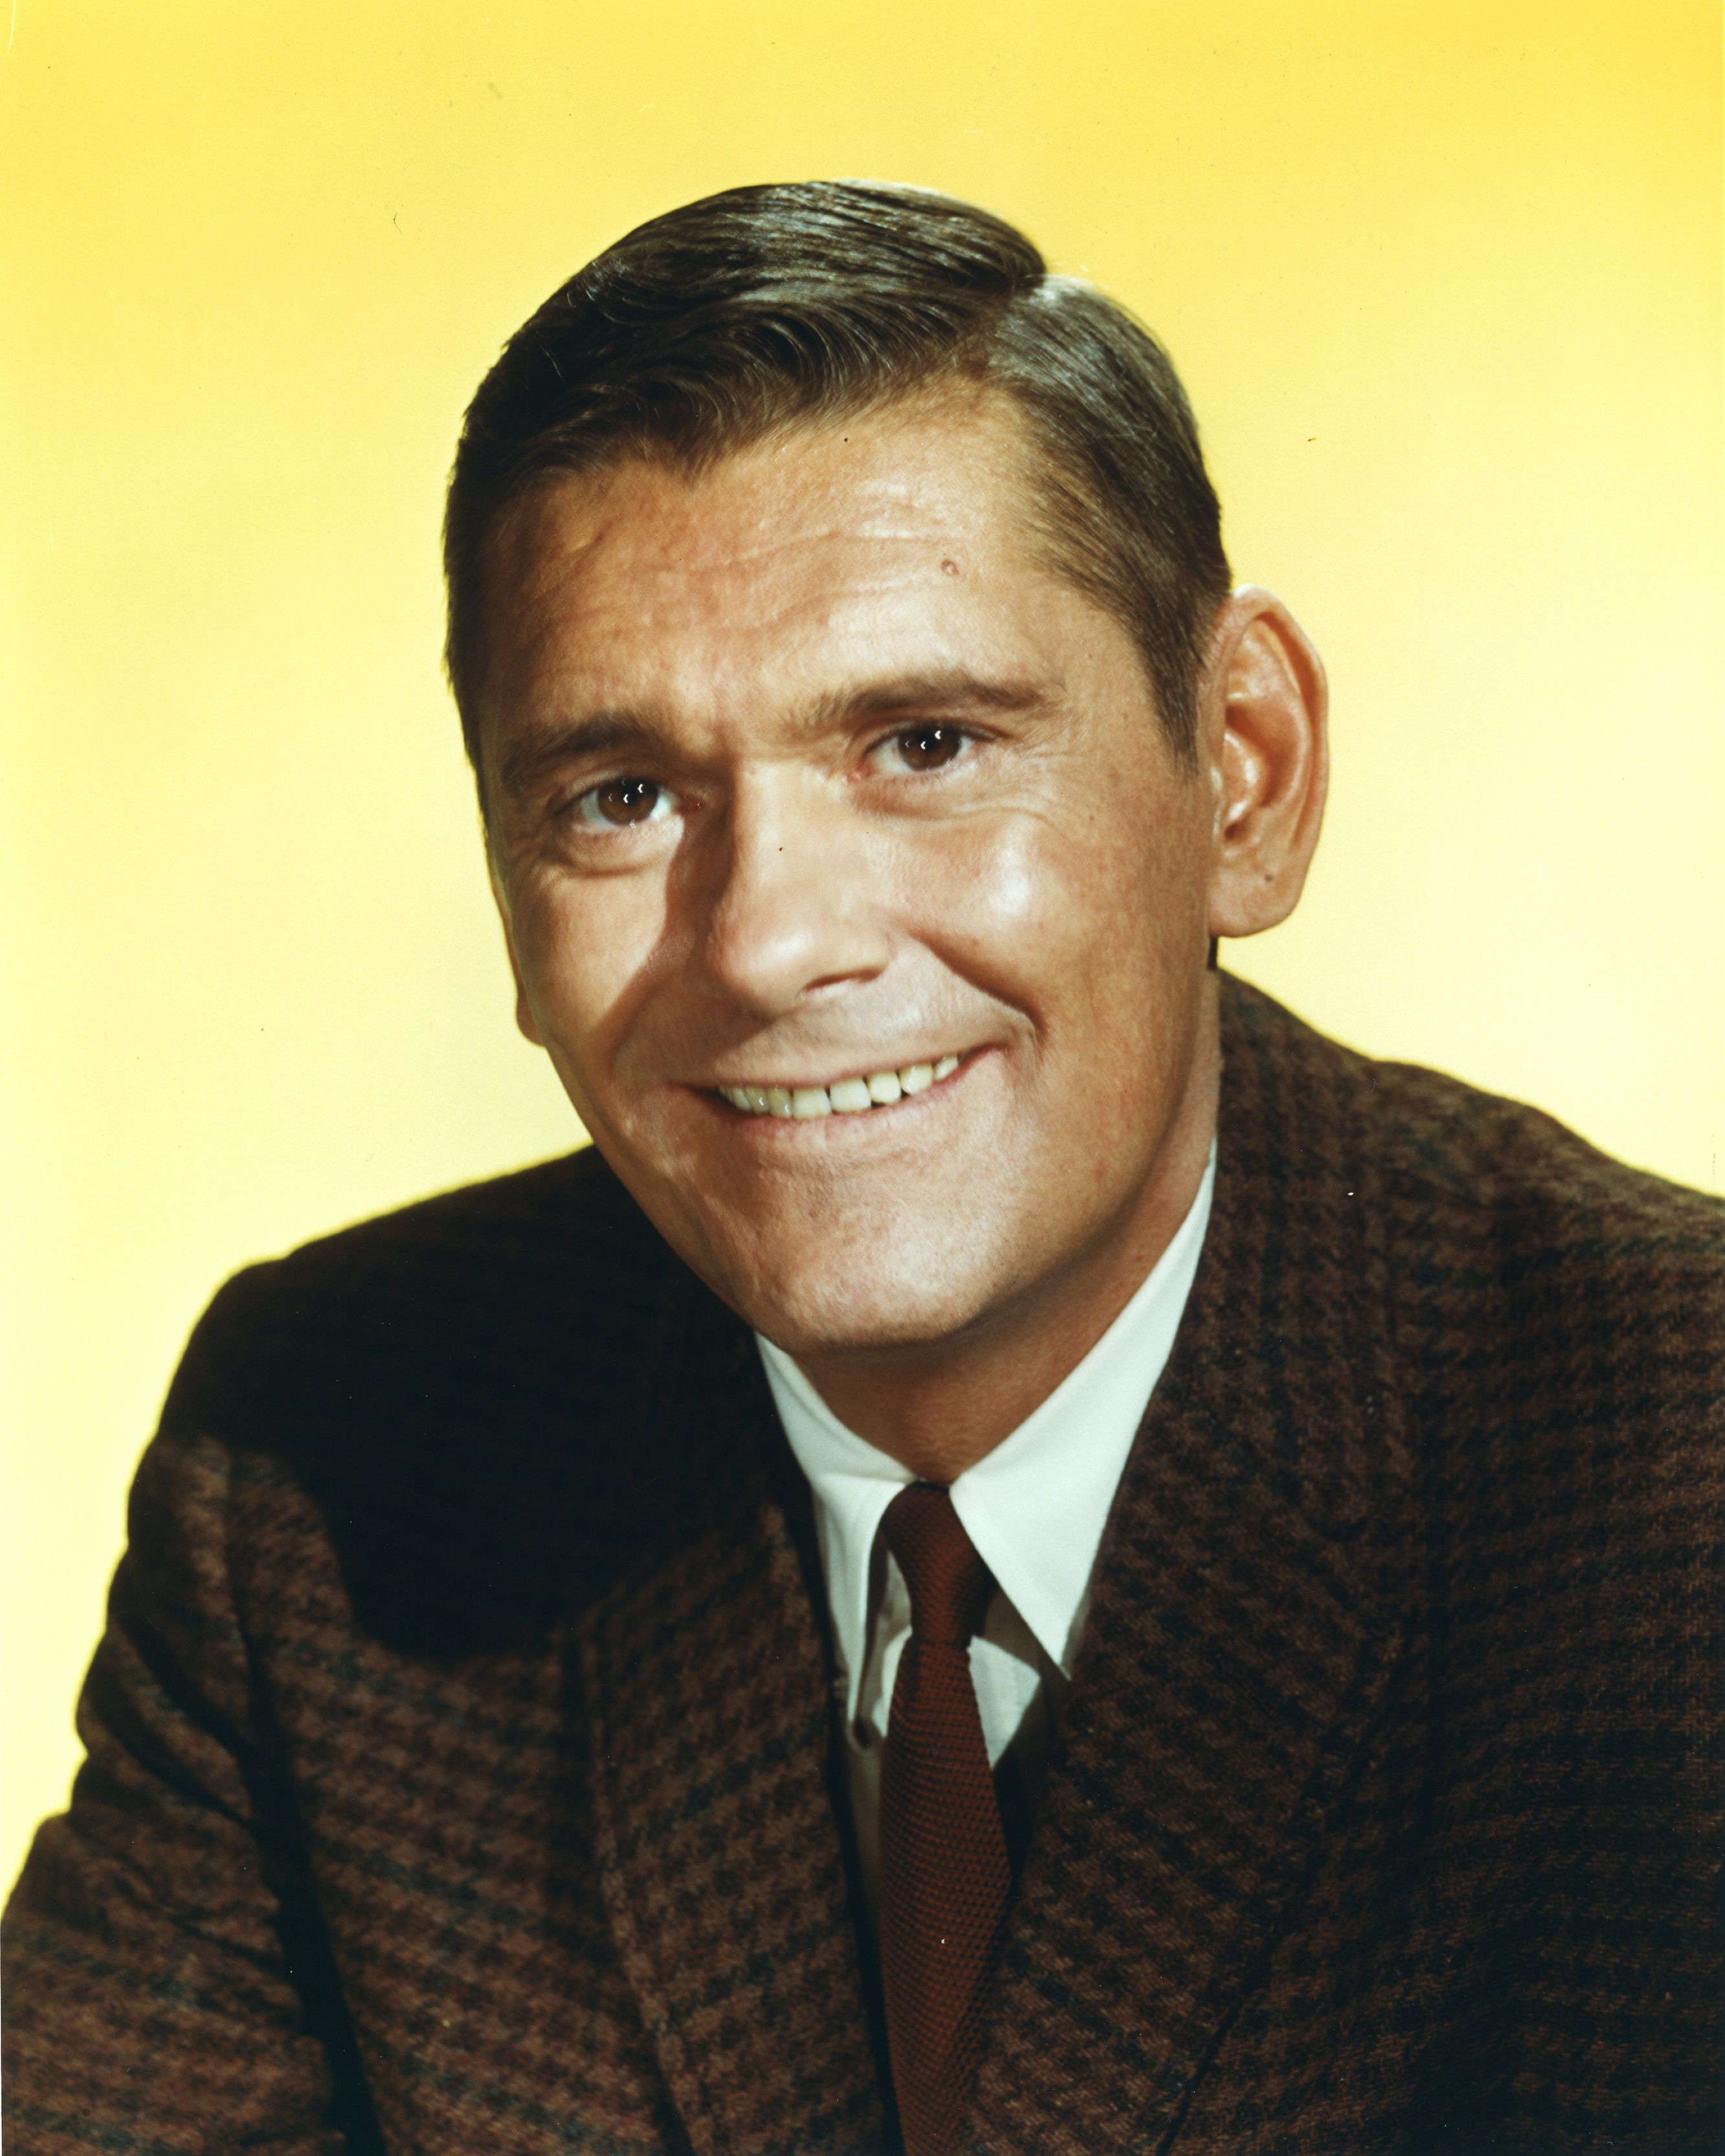 Dick York posing against a yellow background in a portrait issued for television series, "Bewitched," circa 1967. | Photo: Getty Images